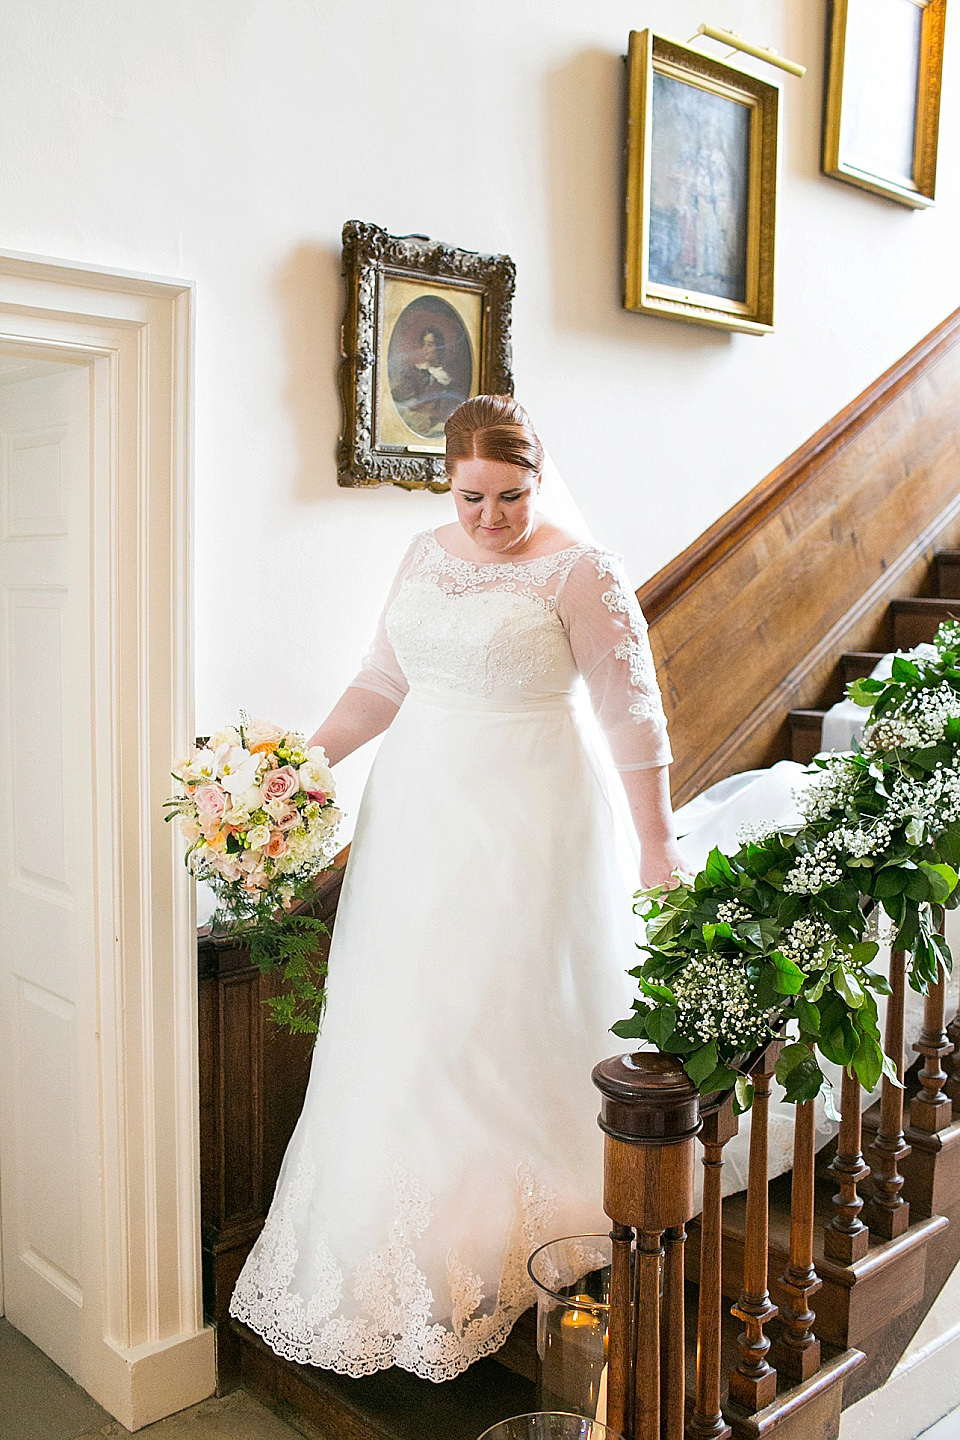 A Charlotte Balbier Gown for an Elegant Black Tie Wedding at Iscoyd Park. Photography by Anneli Marinovich.